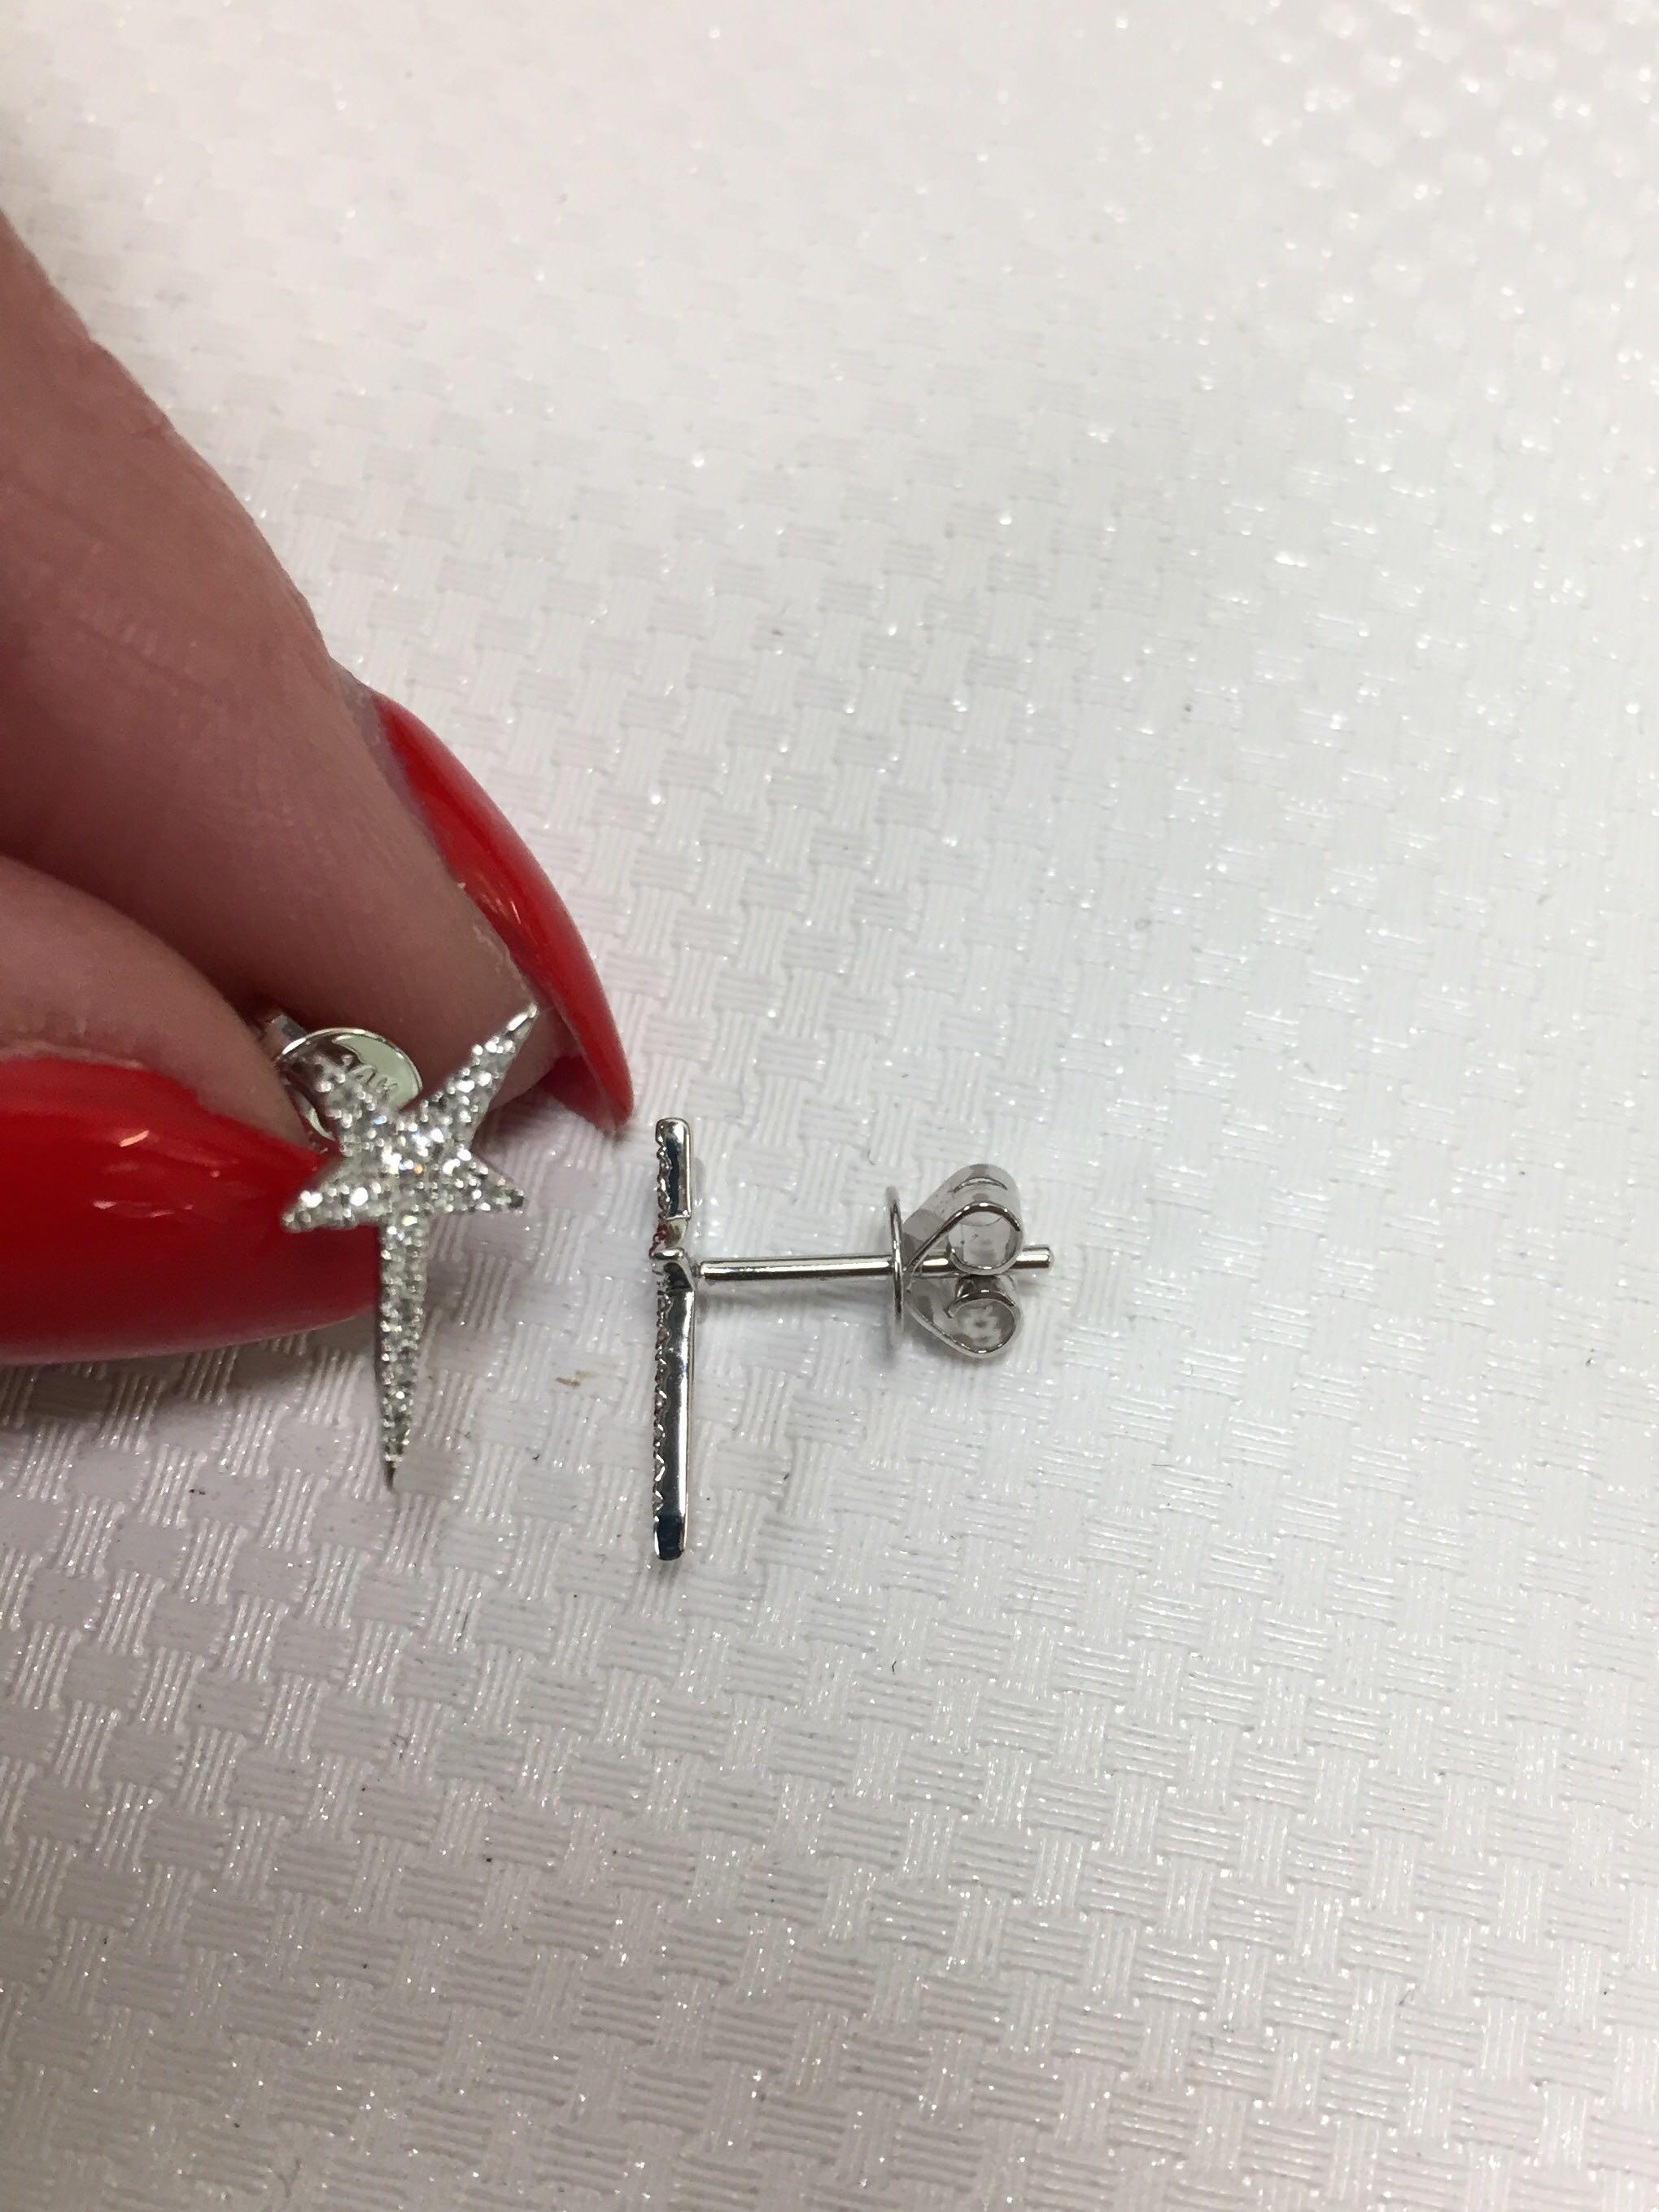 Rachel Koen Pave Diamond Star Stud Earrings 14K White Gold 0.13 Cttw In New Condition For Sale In New York, NY